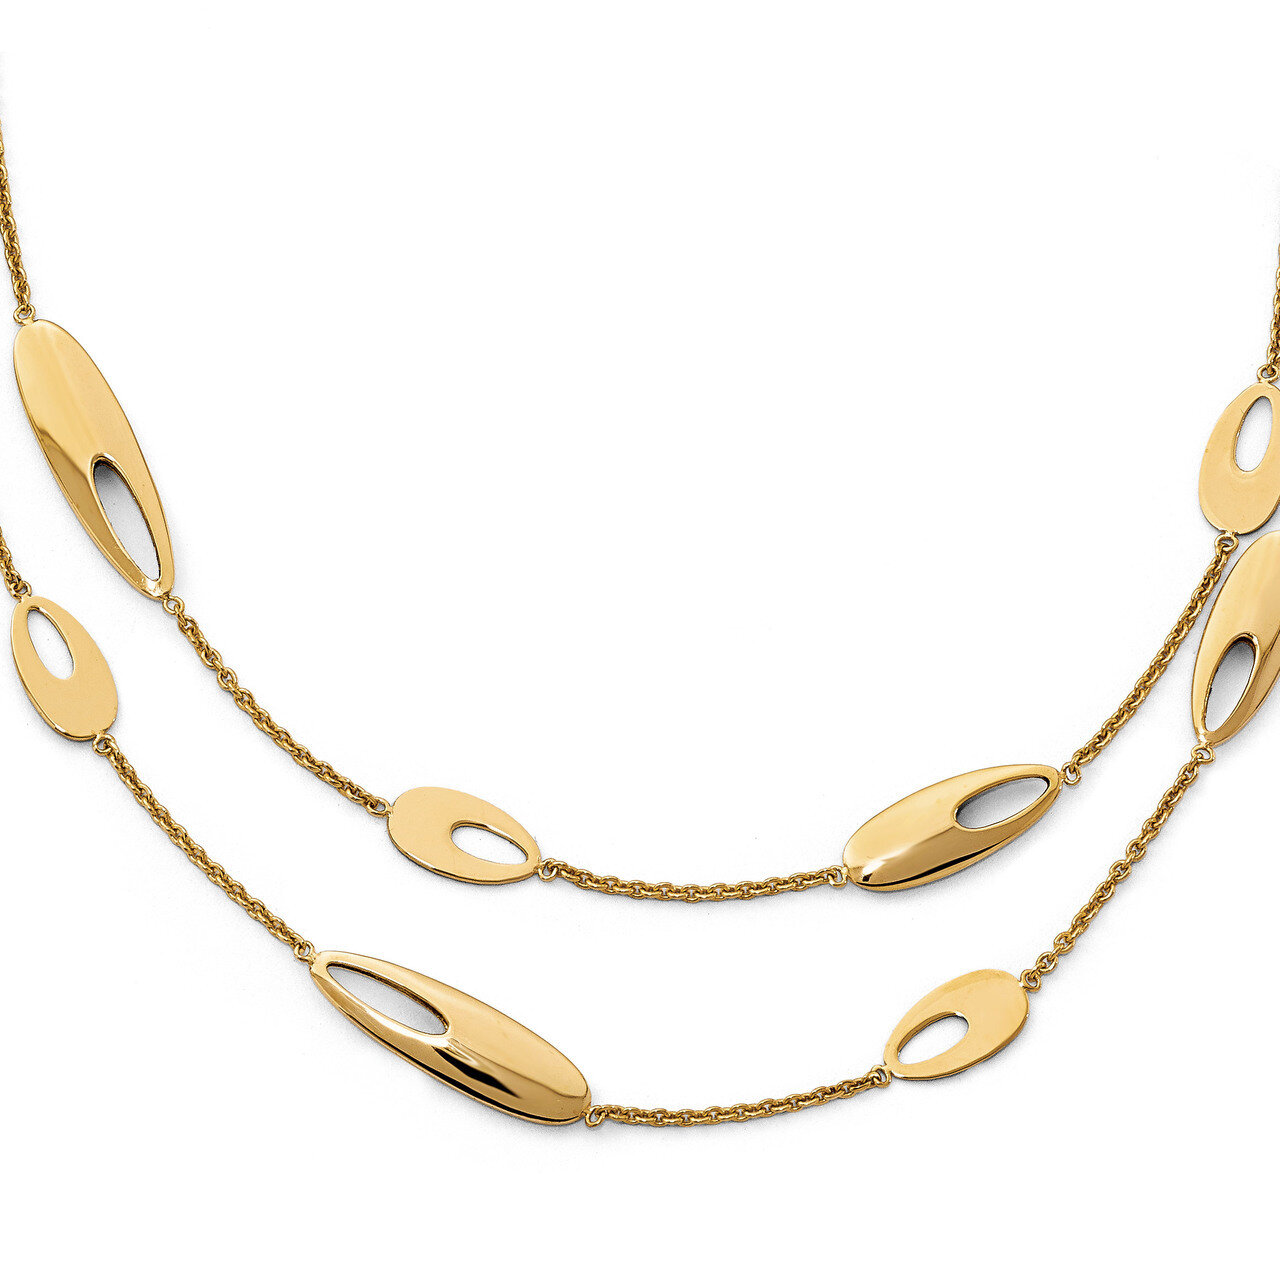 Multi-strand with 2 inch Extender Necklace 18 Inch 14k Gold Polished HB-LF813-18